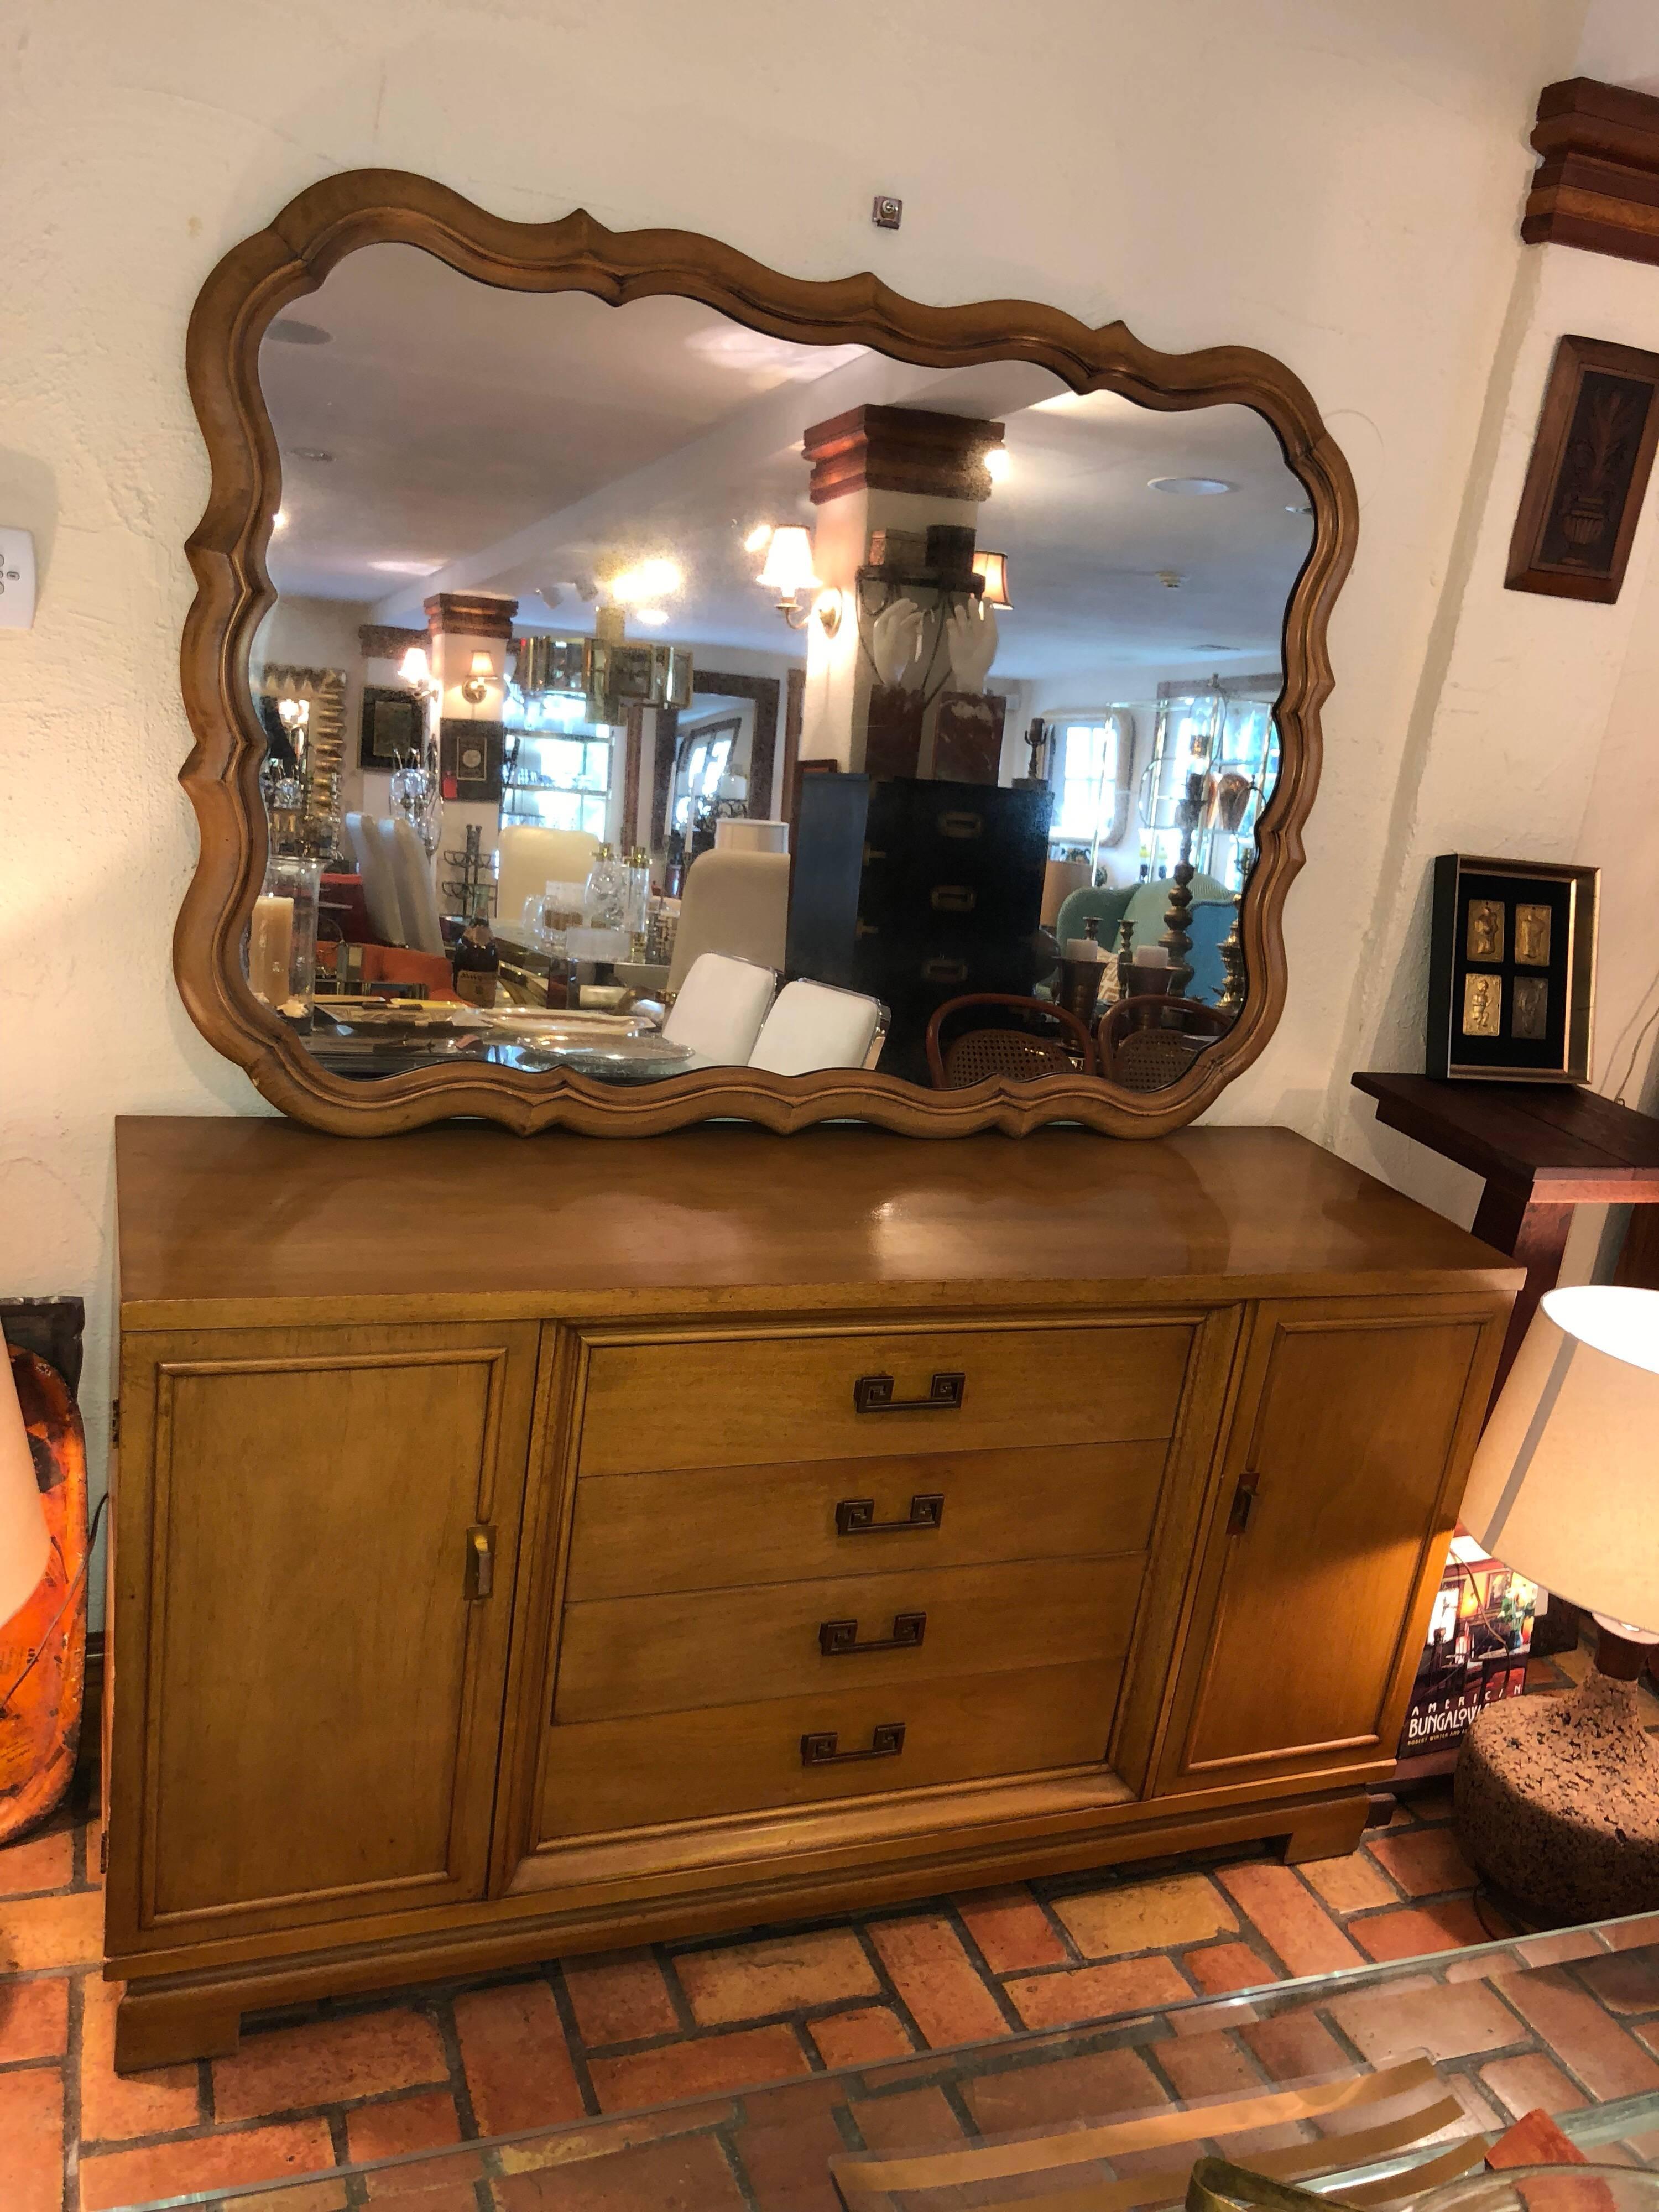 Large scalloped fruitwood mirror. Solid wood construction . It looks gorgeous above our matching wooden Henredon credenza. They match perfectly. The mirror has a slight smoky finish to the glass.  This is intentional. Please inquire about dealer